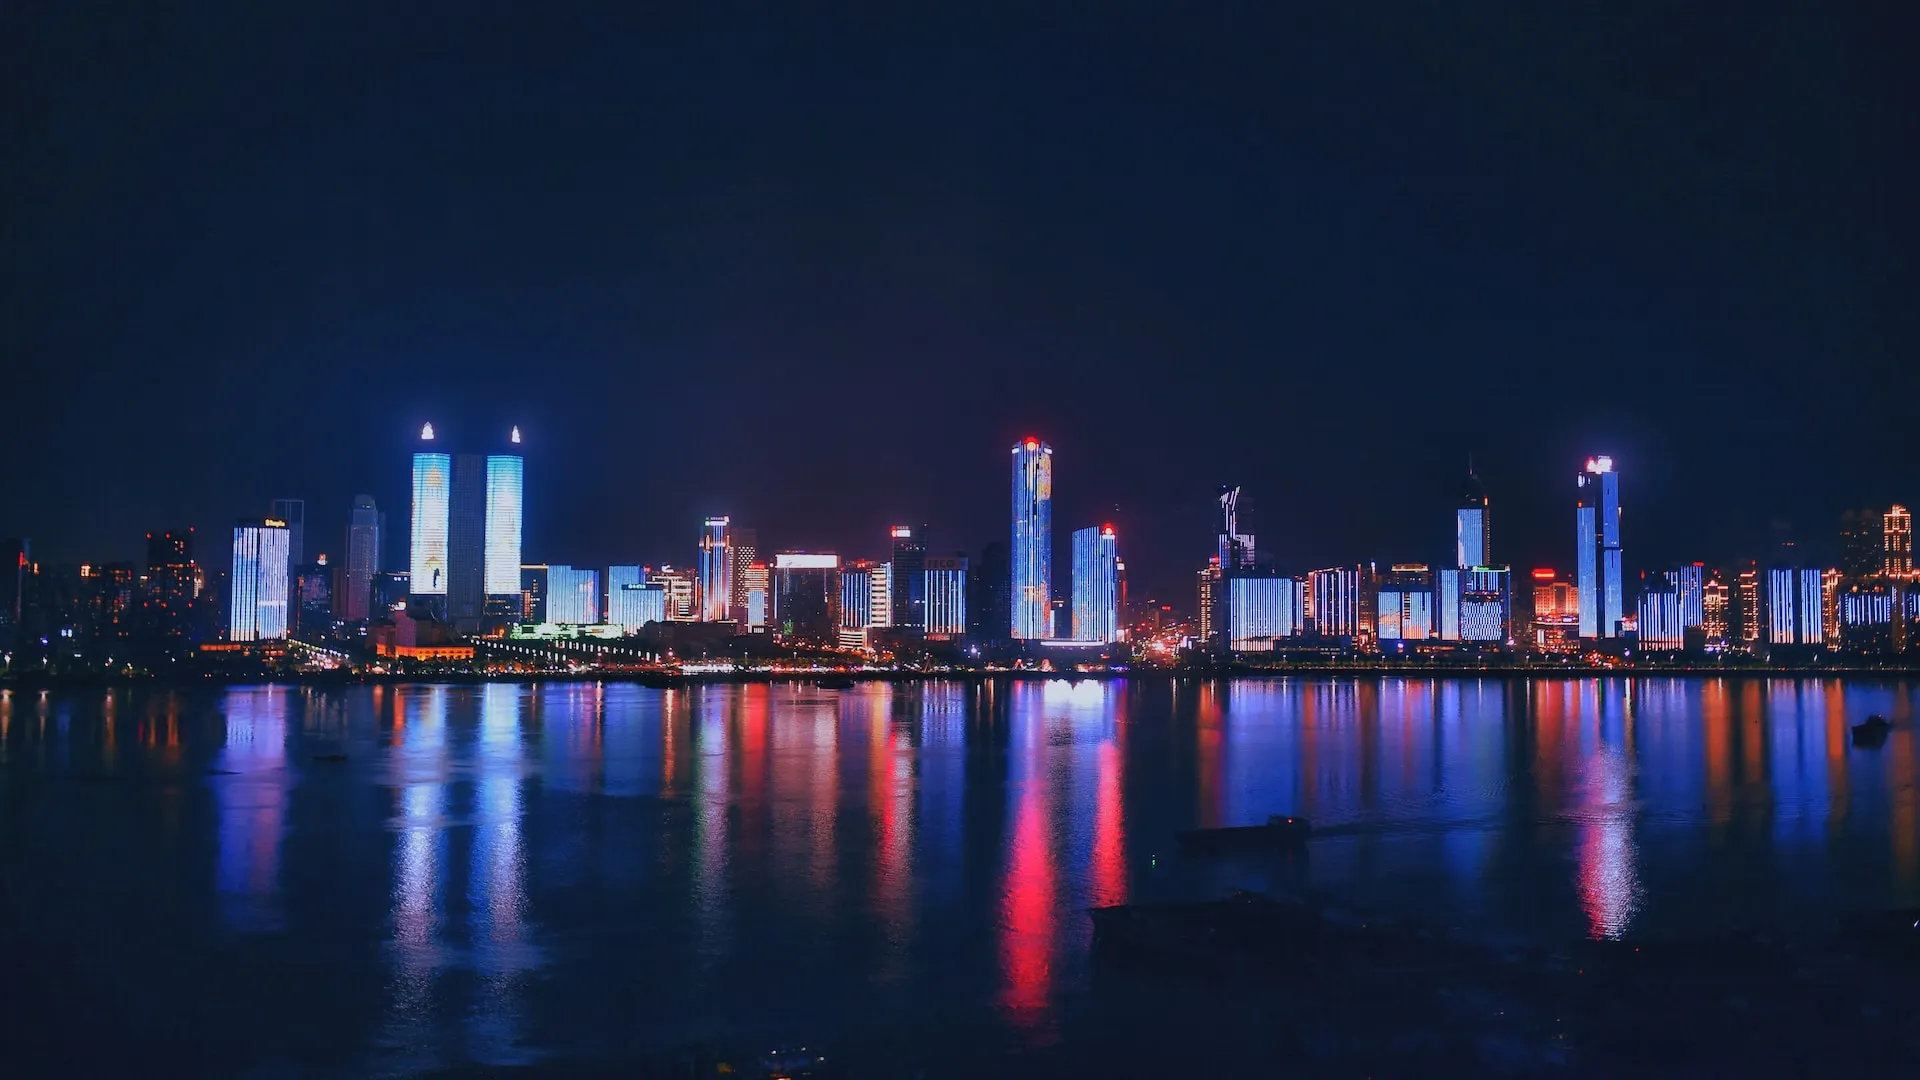 Night view in Nanchang. Source: Photo by Eriksson Luo on Unsplash